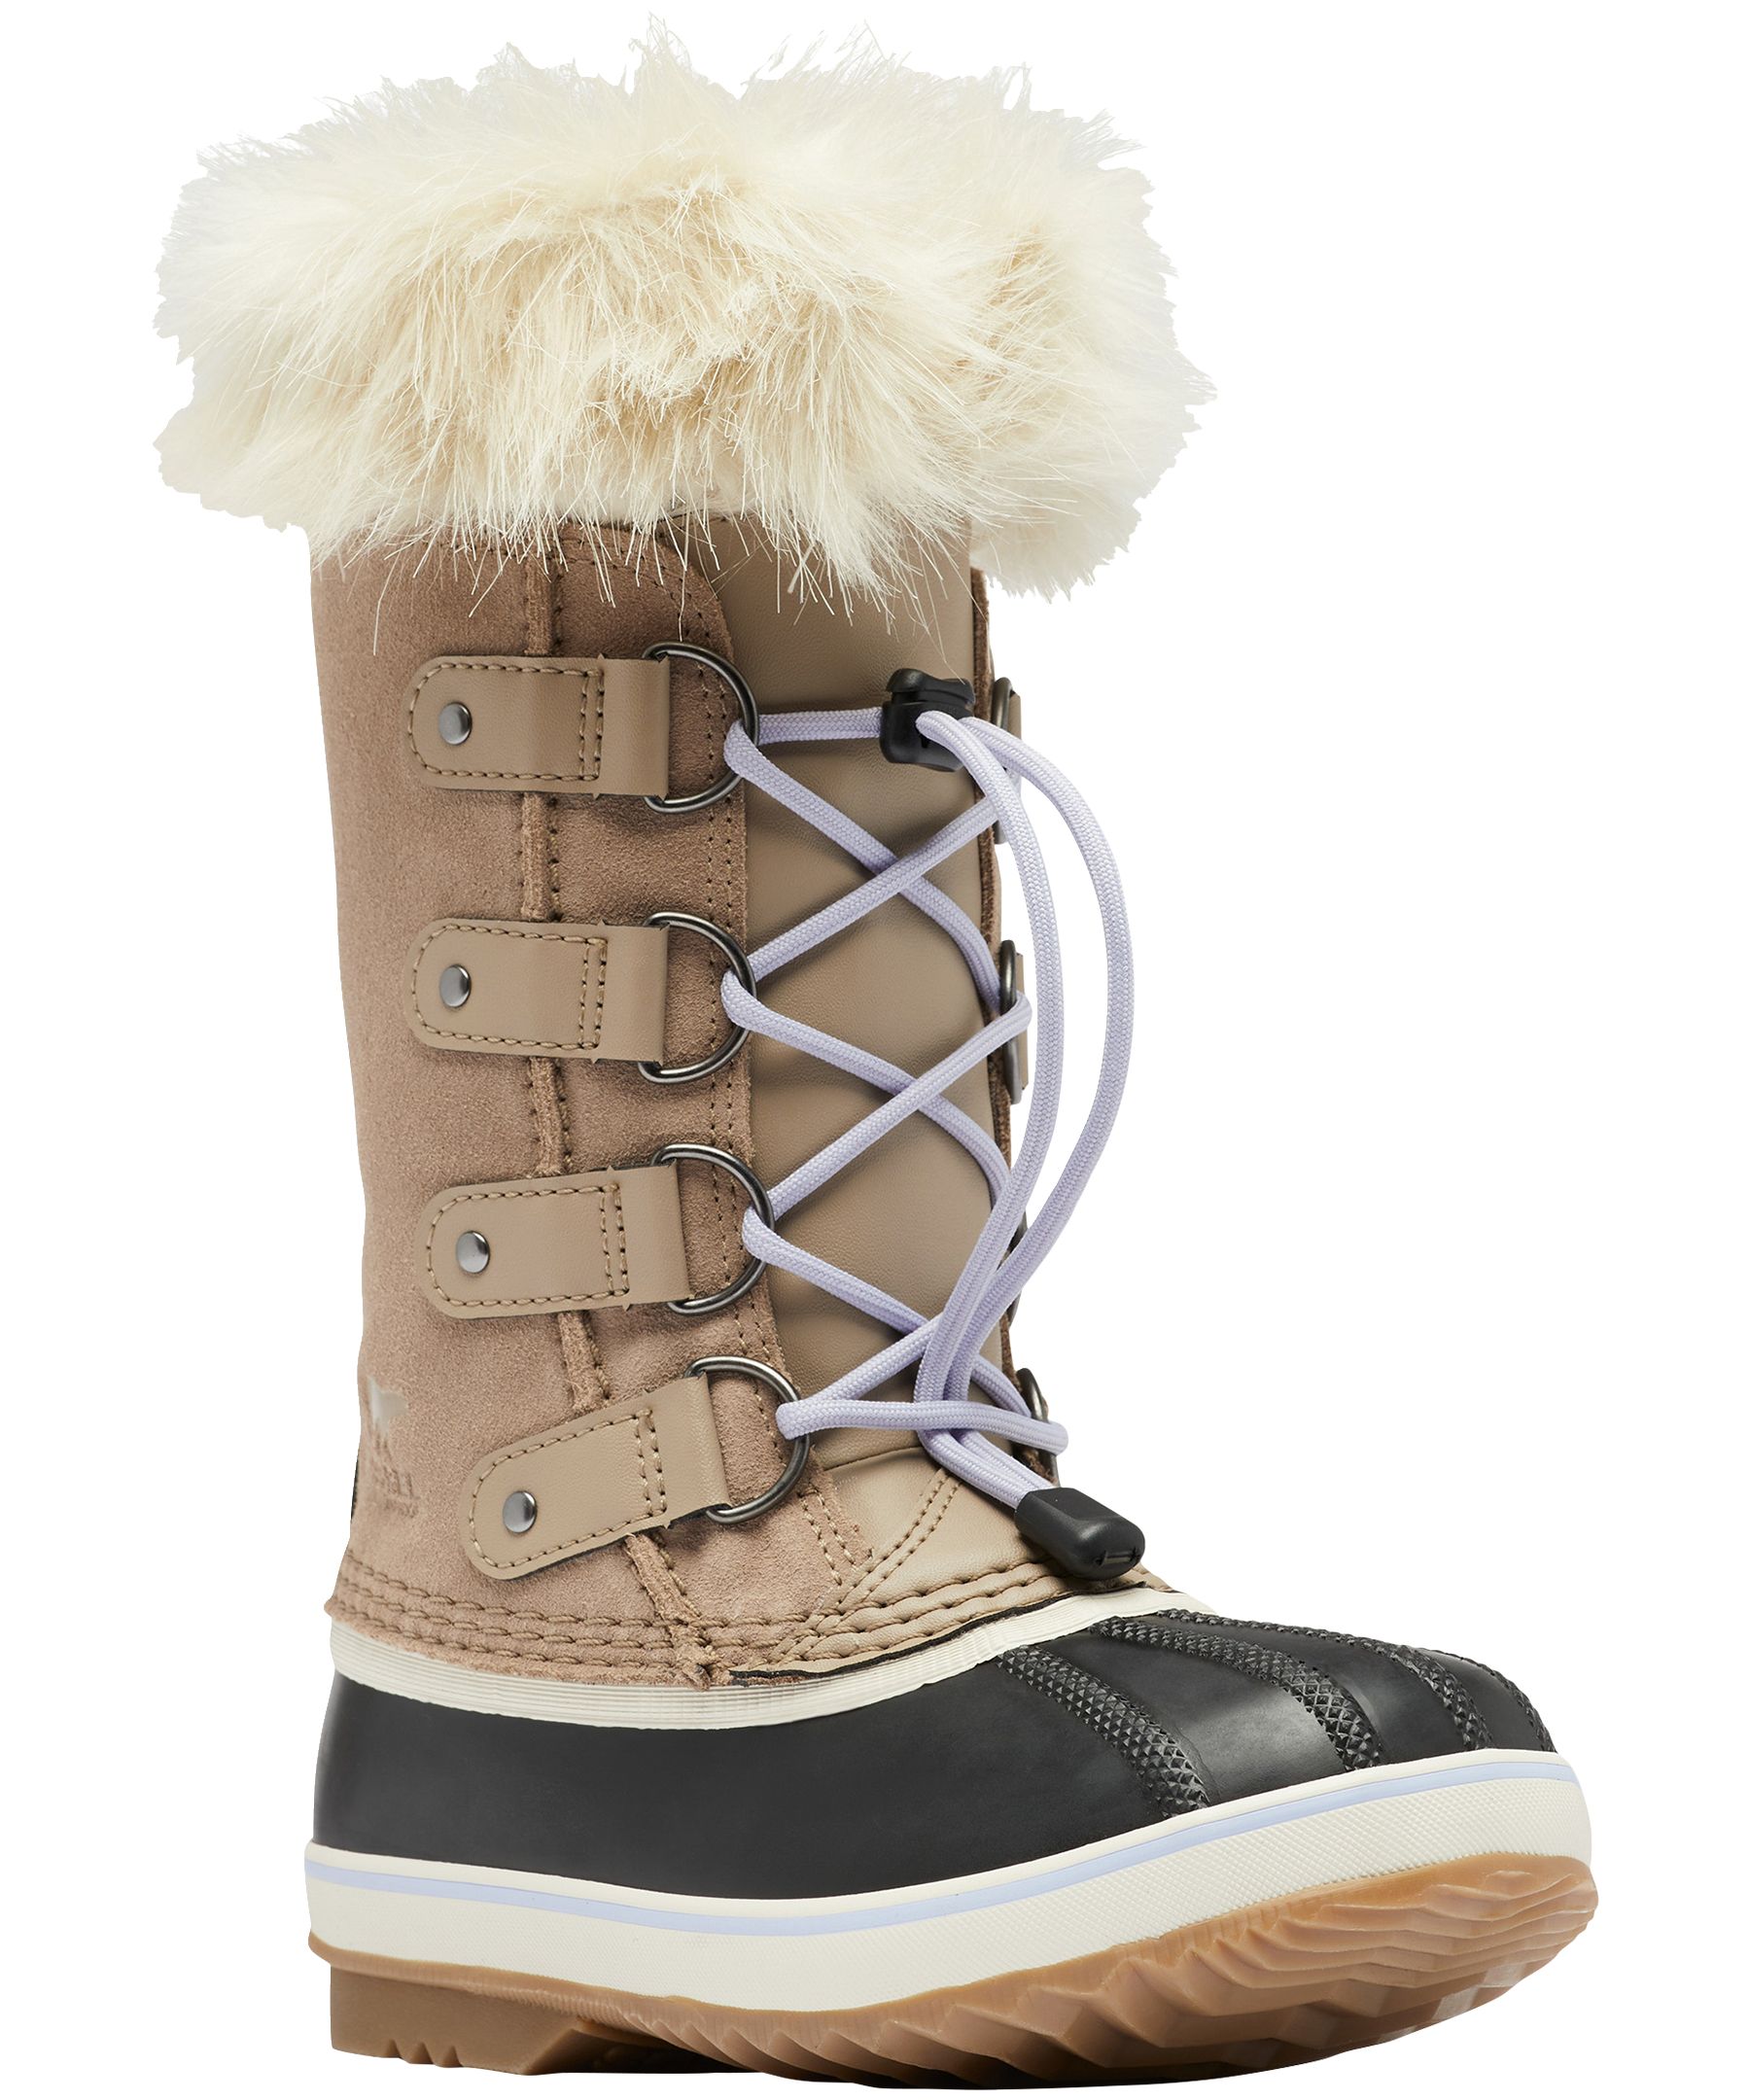 https://media-www.marks.com/product/marks-work-wearhouse/other-world/childrens-wear/410036596130/sorel-yth-joan-of-arctic-wp-pac-winter-boots-ome-c3429ddb-96be-4f03-bd0d-681c2b158c1e-jpgrendition.jpg